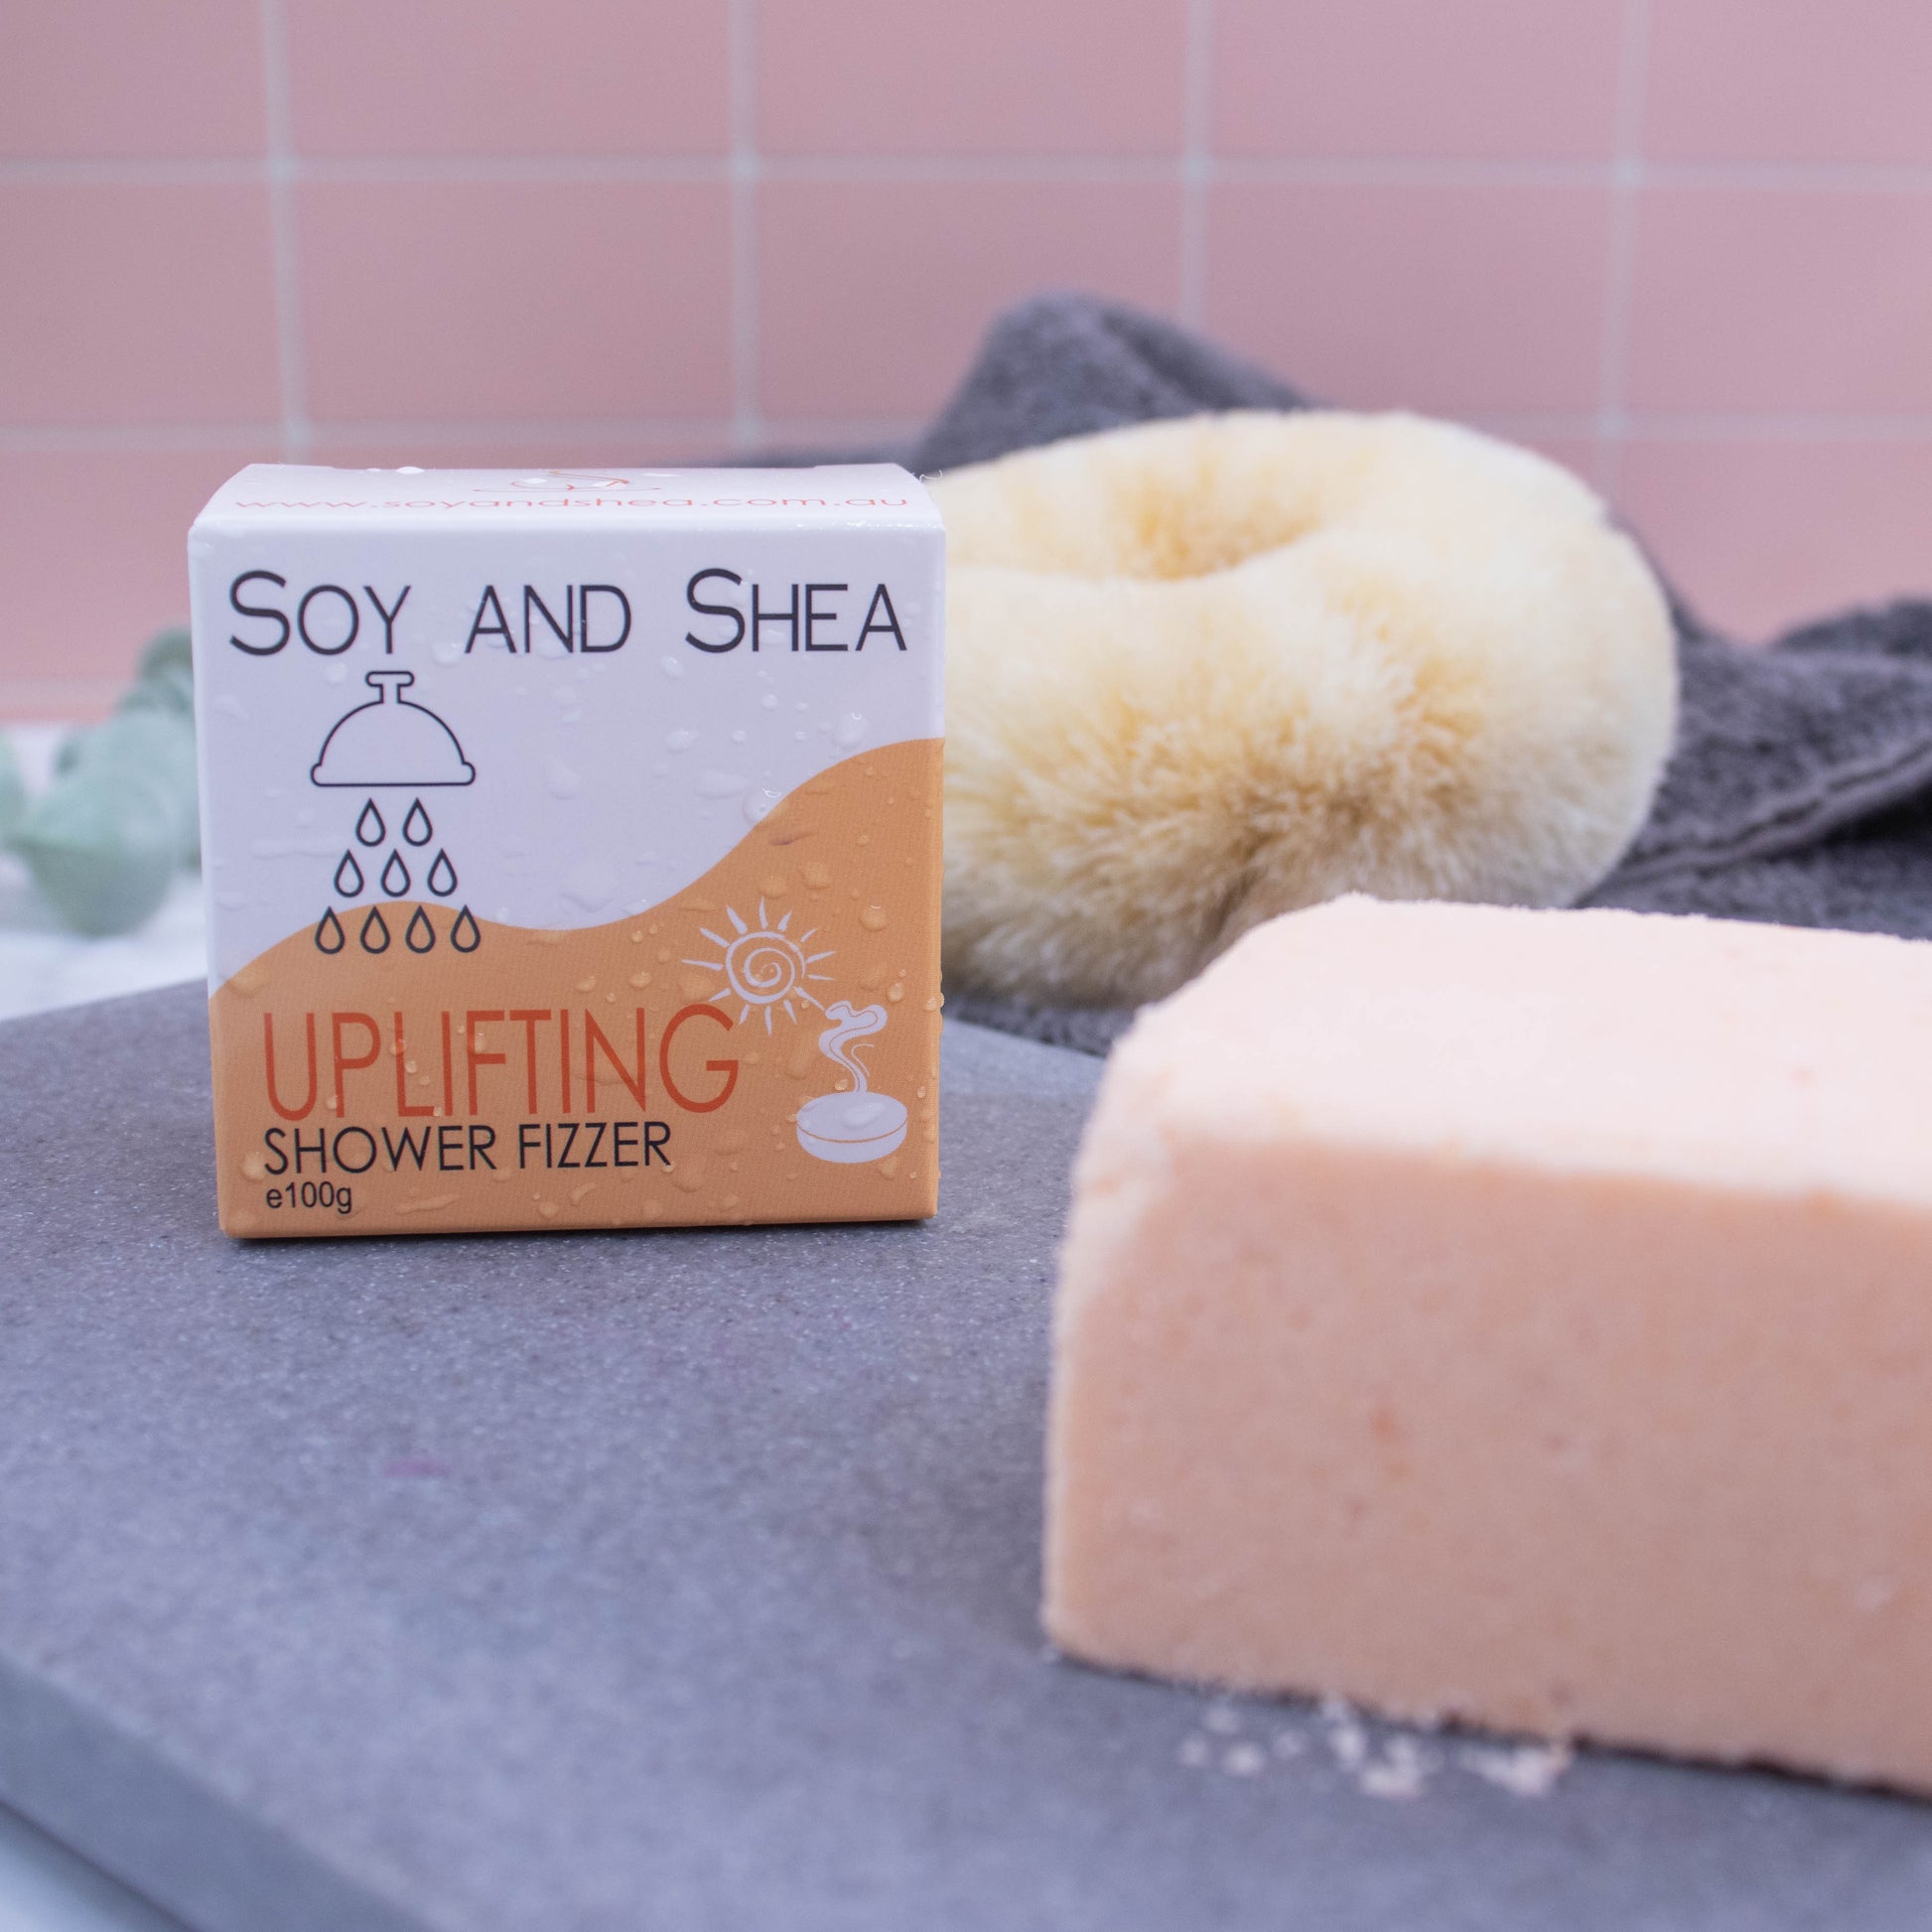 At the front of the picture sits a light orange block on a grey stone slab.  To the left and slightly back is the box which is white with a orange wavy pattern.  It has water droplets covering the box.  In the background is a pink tile wall along with a towel and body brush.